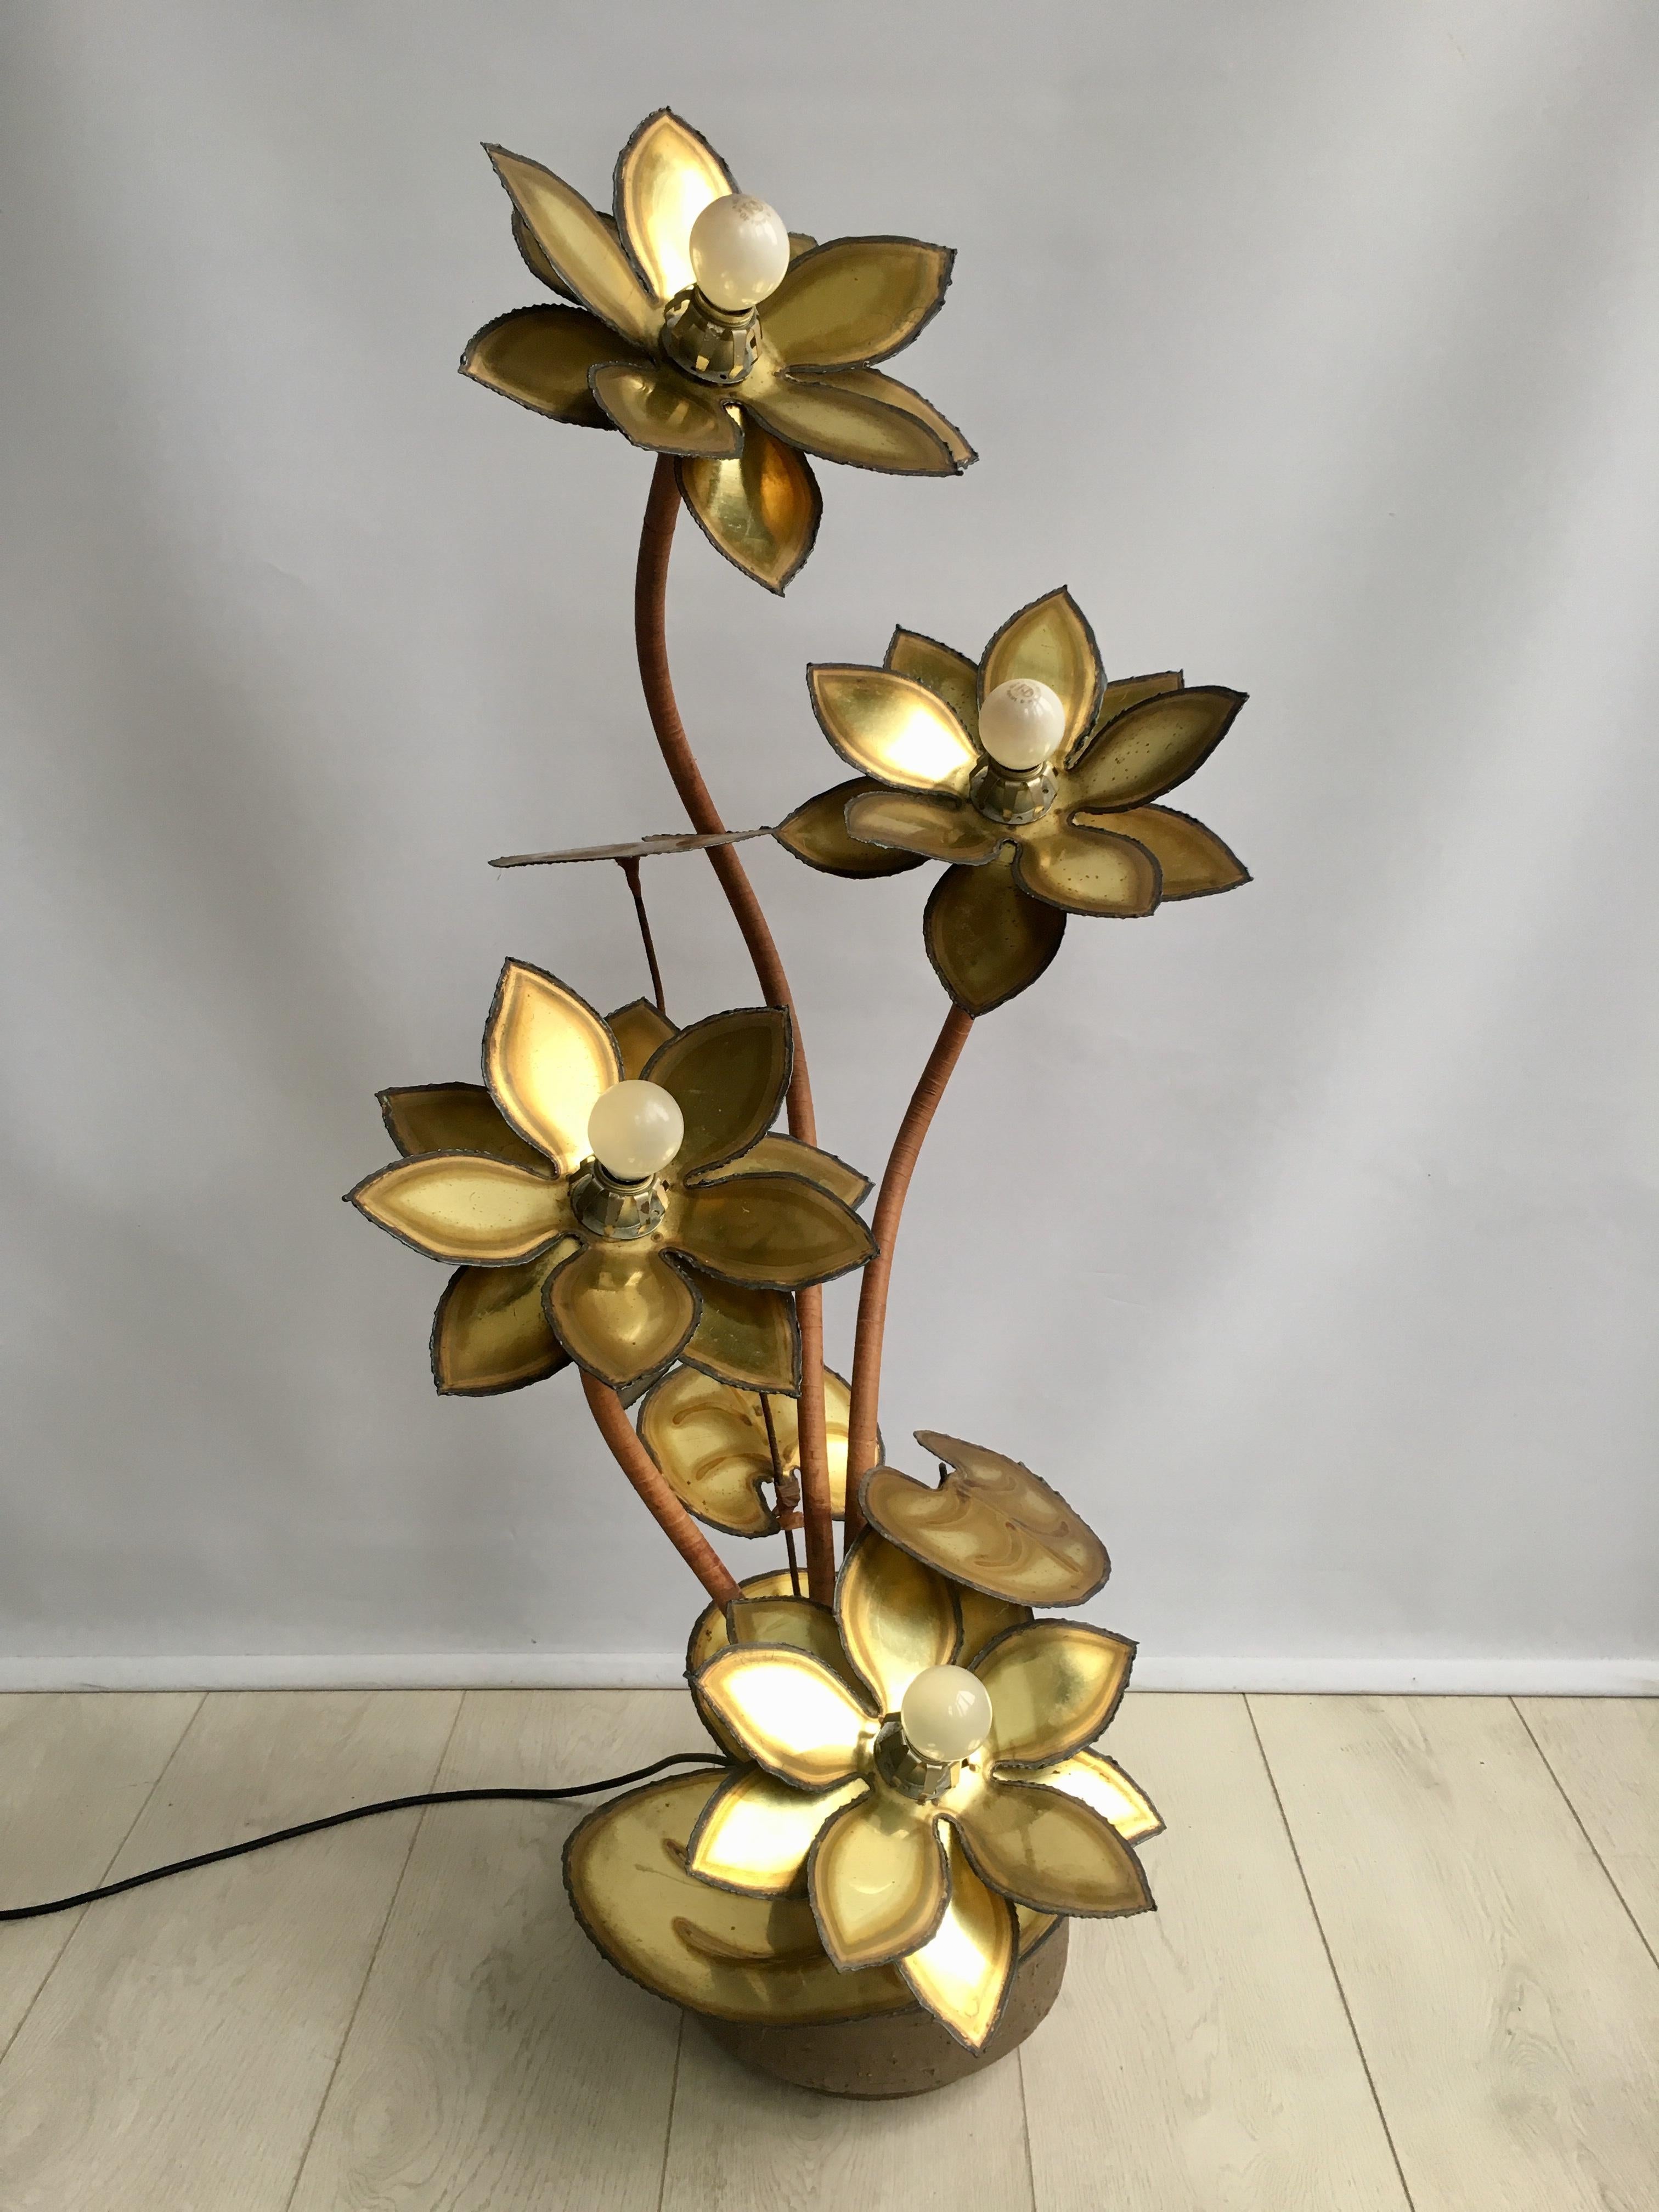 Beautiful Maison Jansen lamp with 4 lotus flowers 

The petals and metal work are in great condition

Stands 105cm tall so can sit on the floor or a table (approximate 50cm wide).